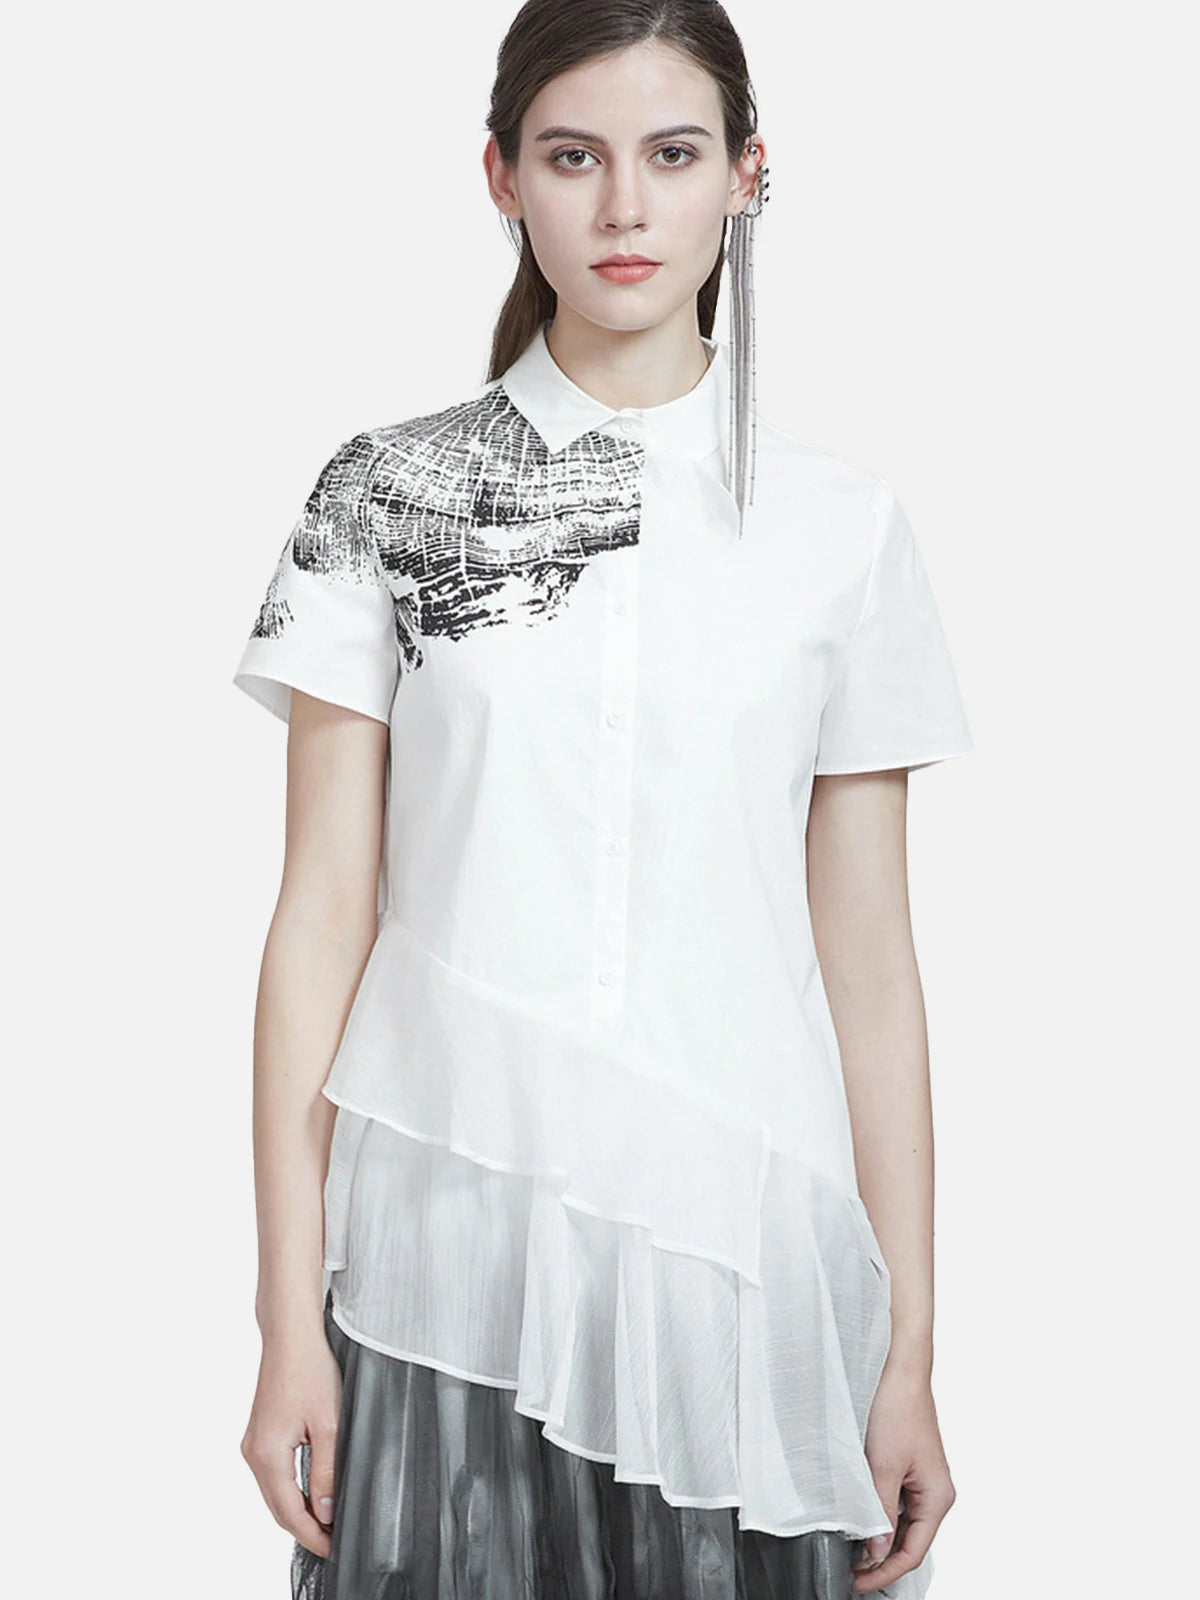 Contrast National Style Printed Chiffon Shirt With Lapel